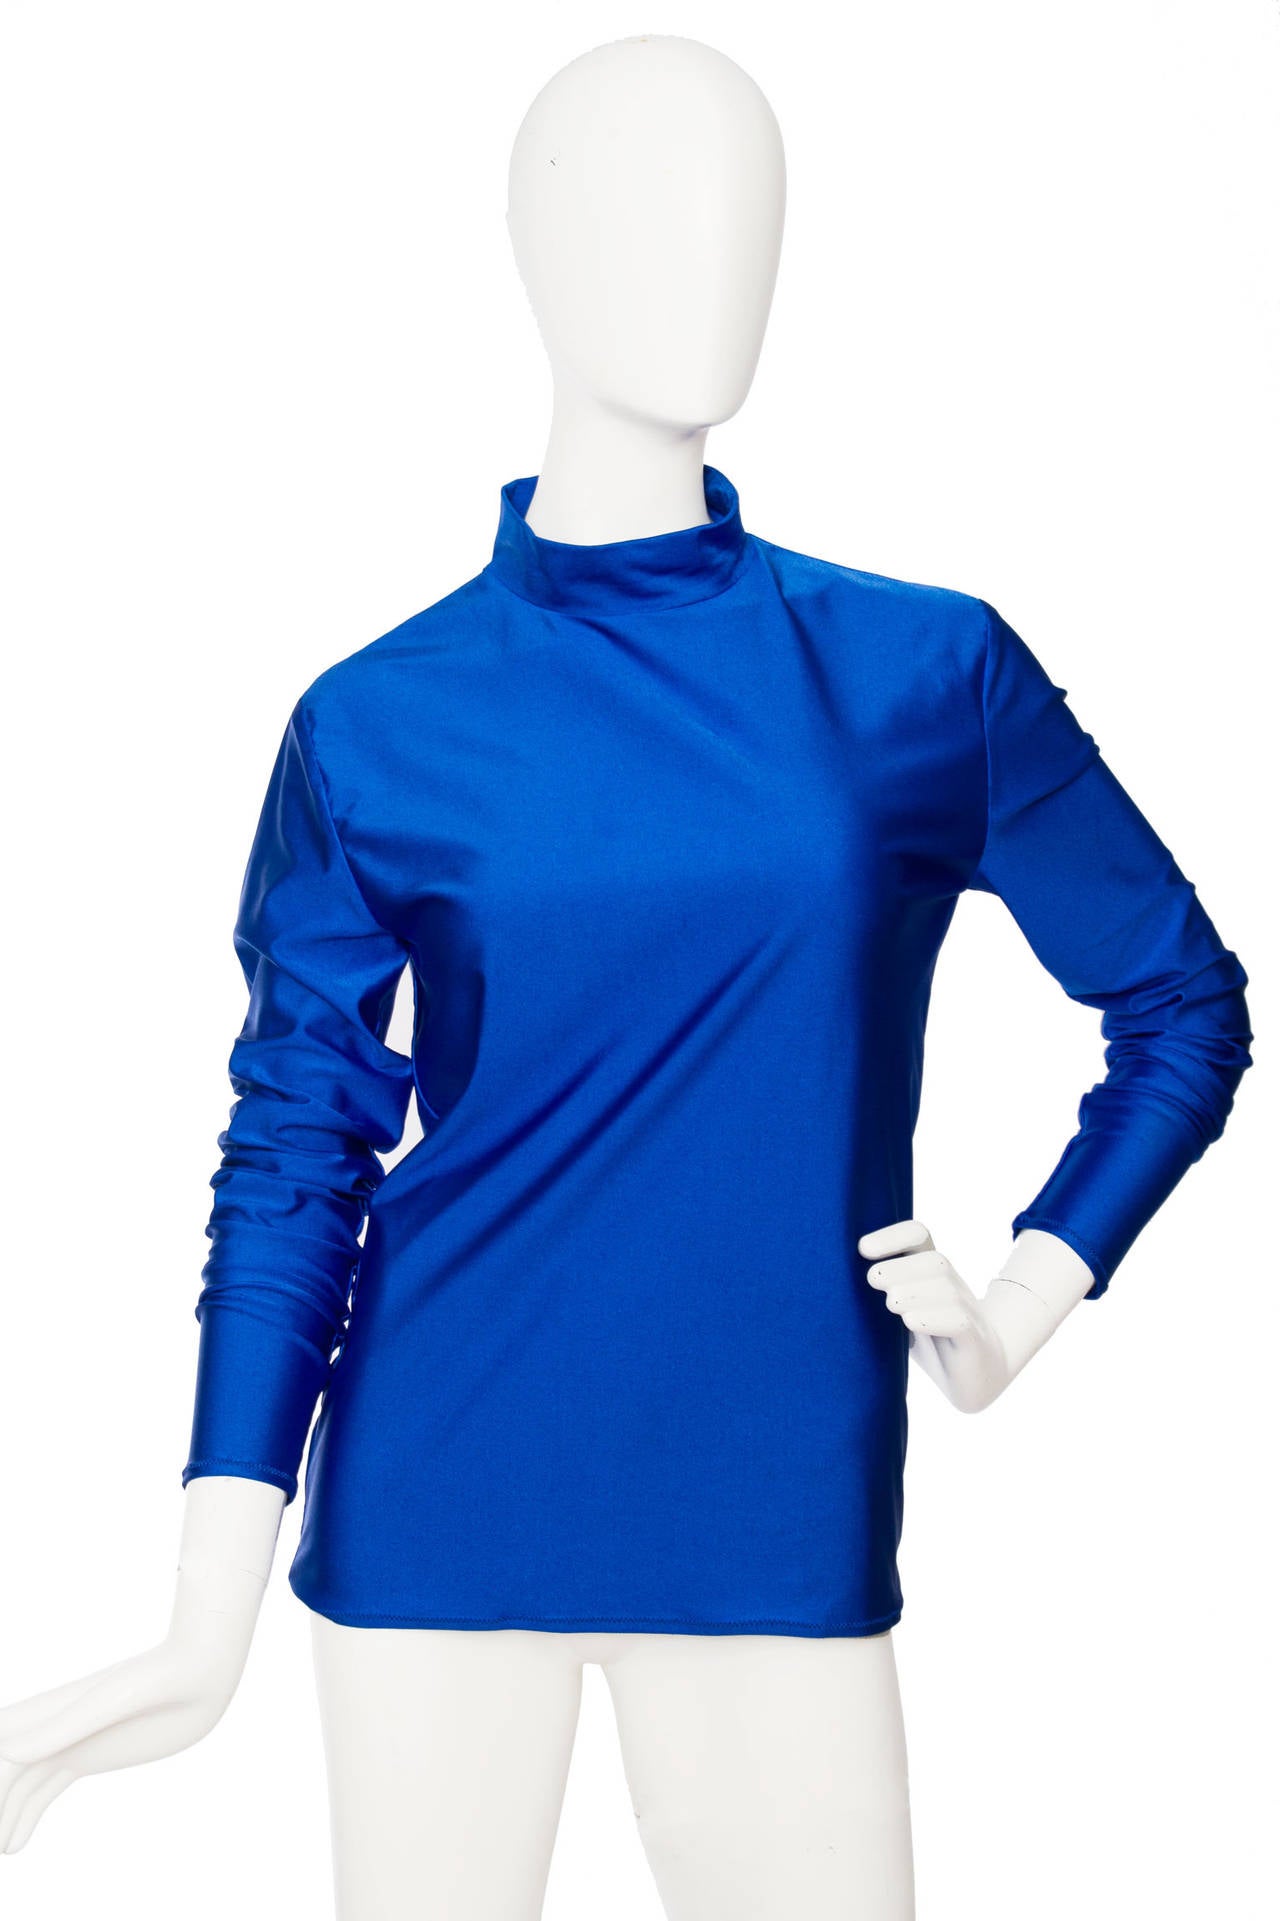 A 1990s Jean Paul Gaultier electric blue blouse with turtleneck and long sleeves. The blouse in made in a stretchy polyamide fabric giving it  a super shiny effect. 

The size of the blouse corresponds to that of a modern size Medium.